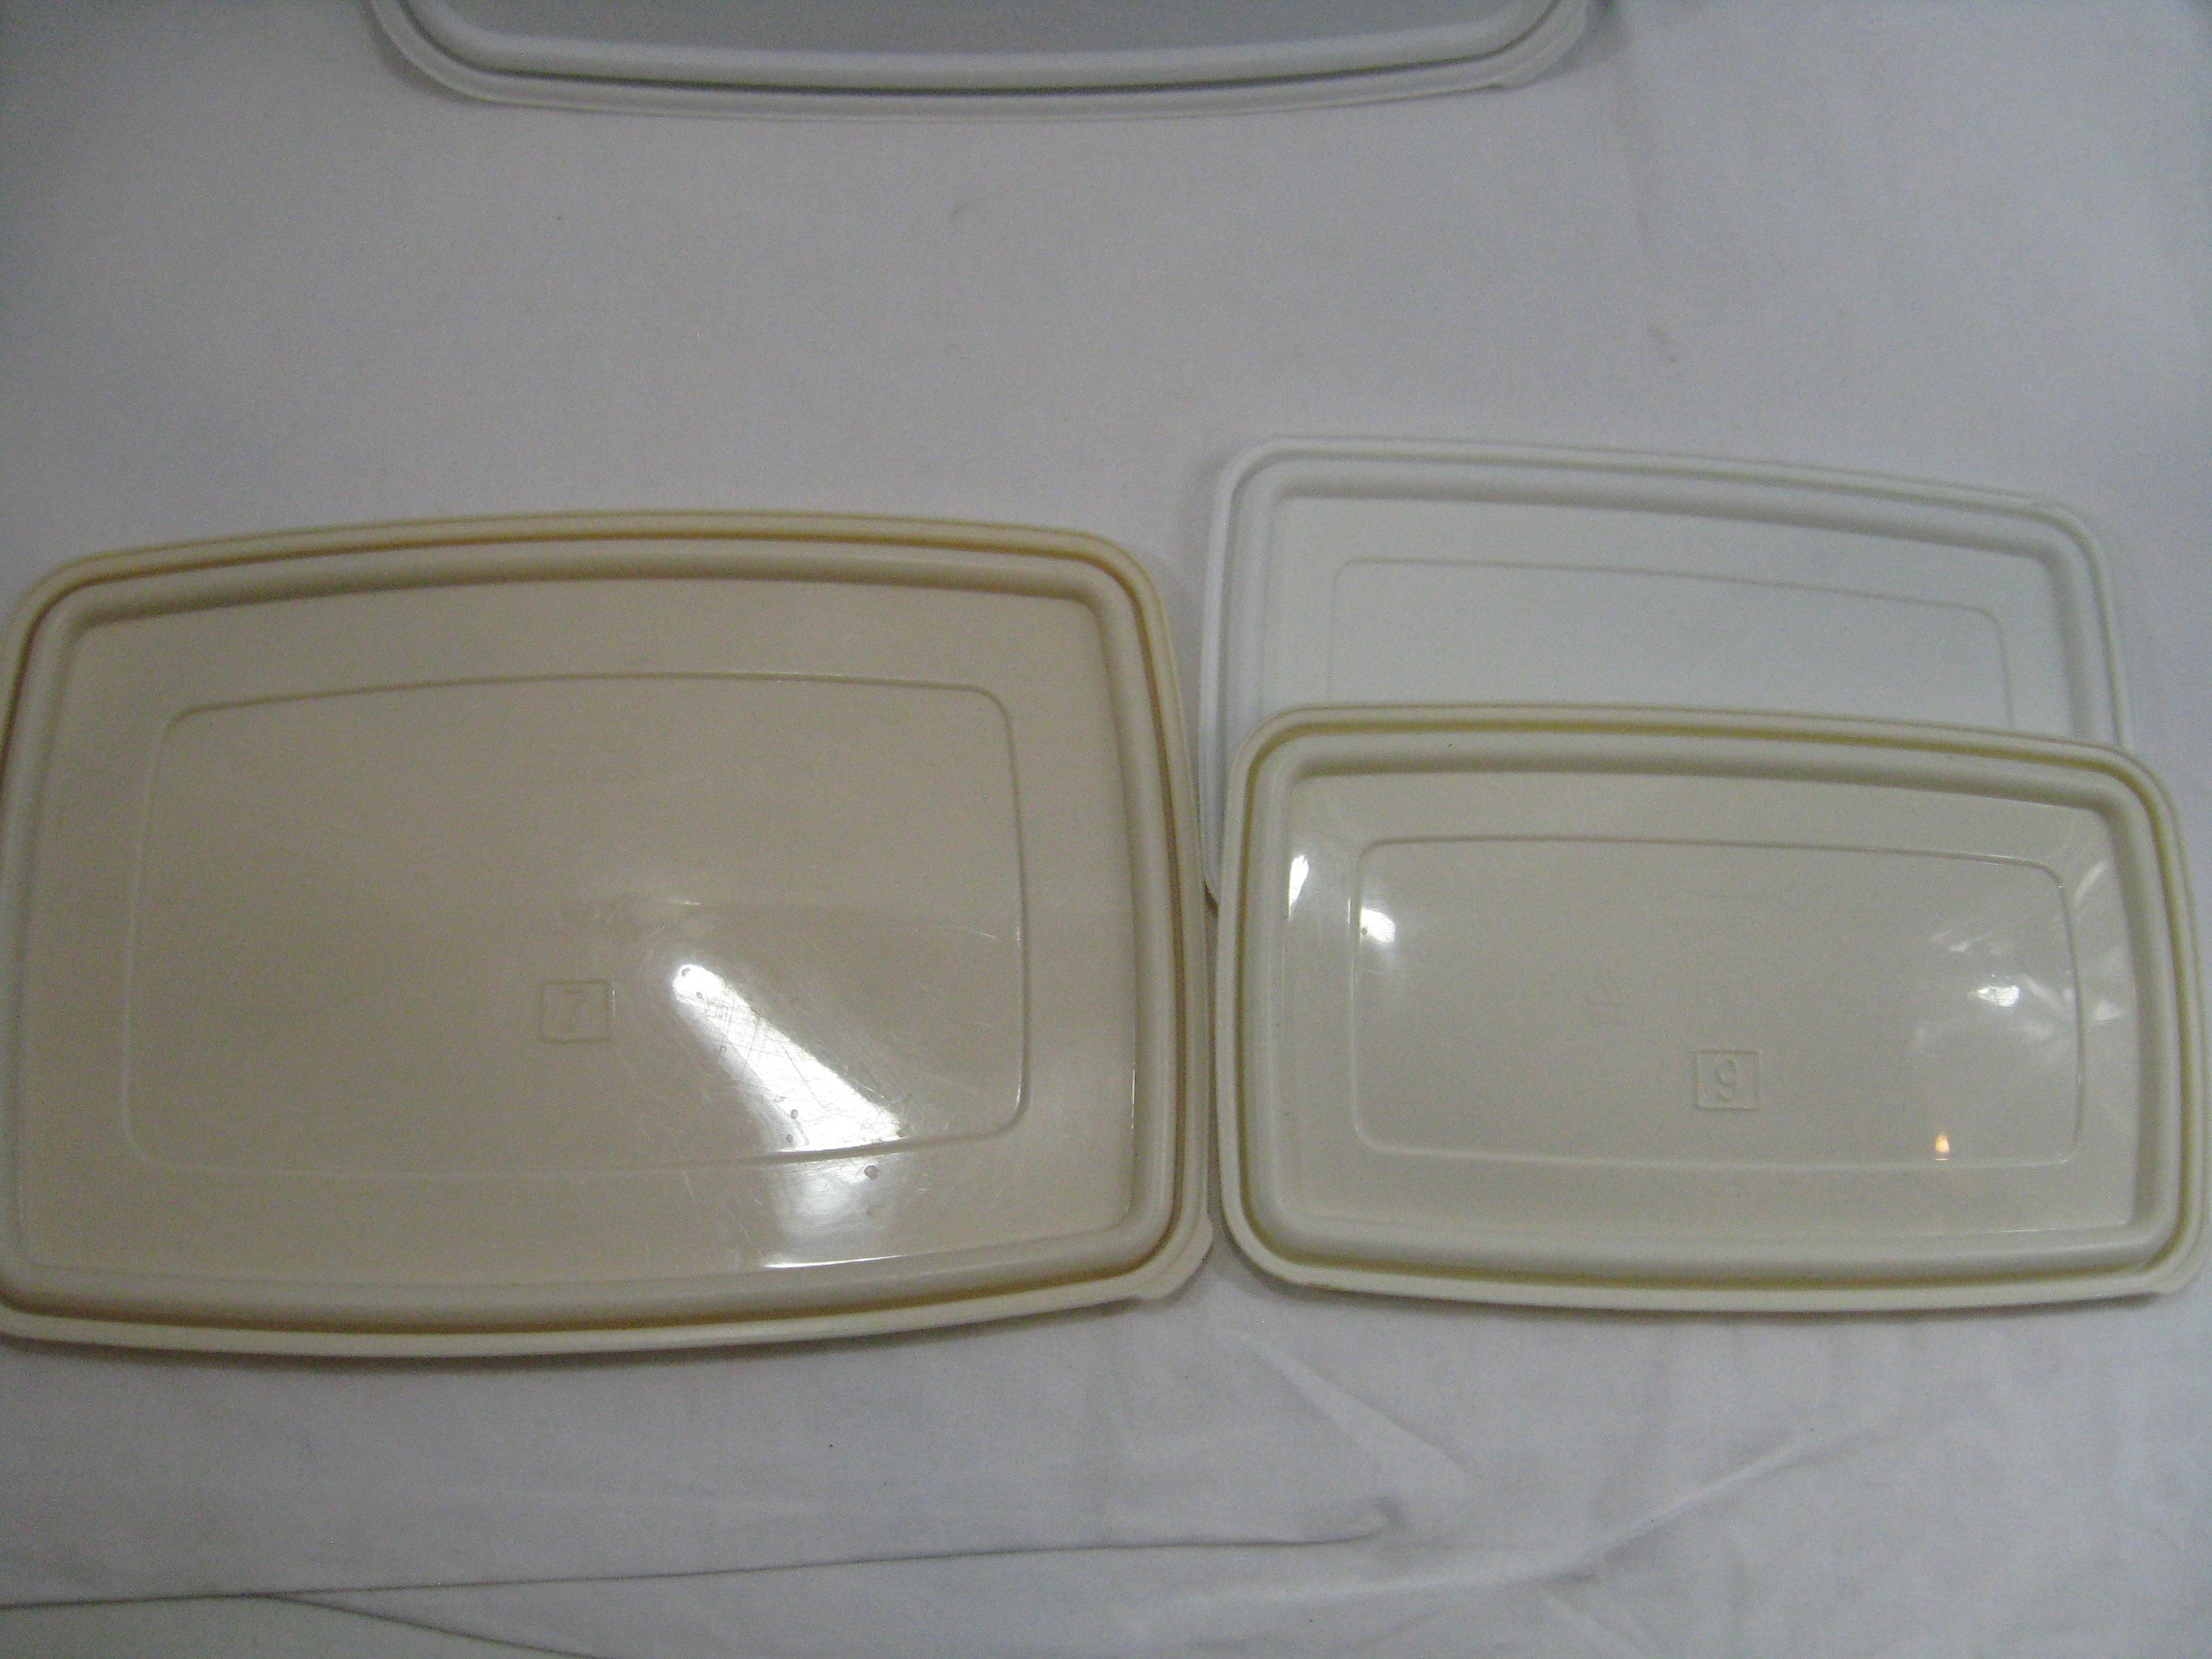 2 Rubbermaid Servin Saver Small Round Containers Almond Lids #0 1/2 Cups  Vintage